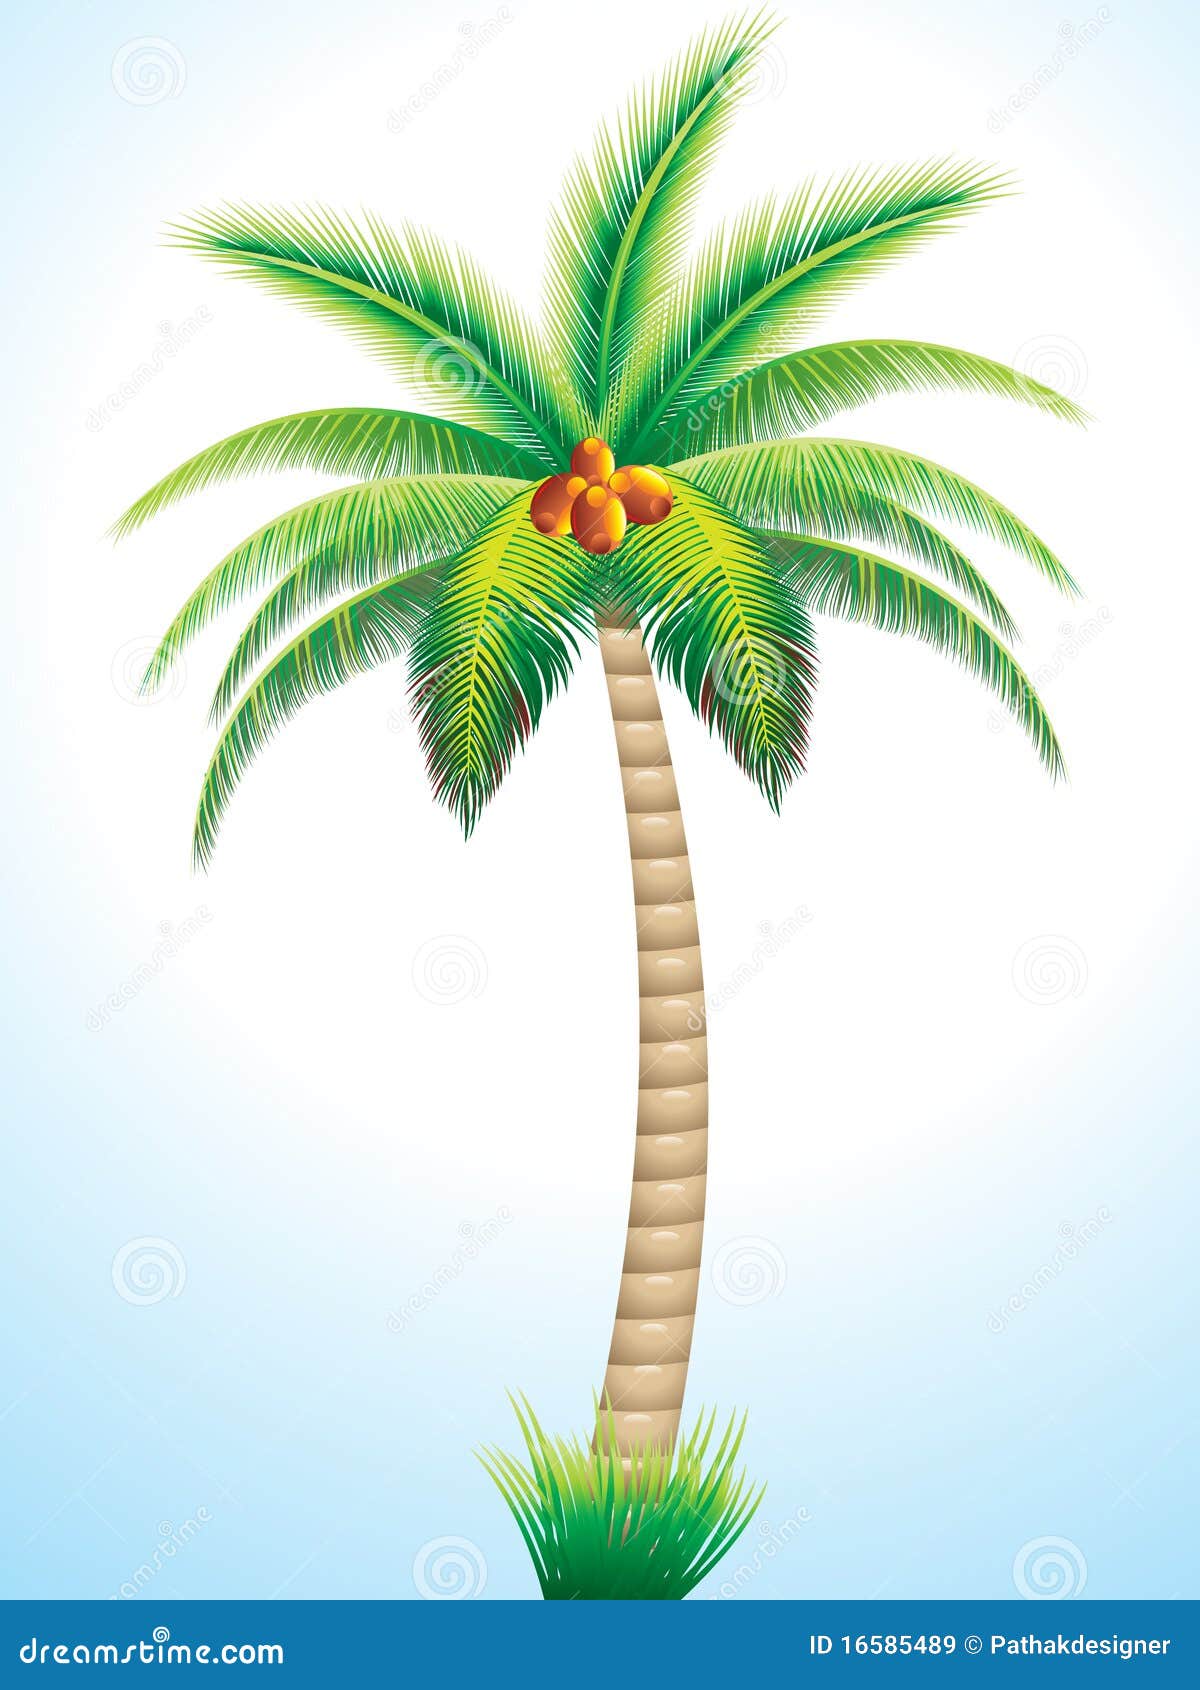 Tribal Coconut Palm Tree Drawing by Heather Schaefer - Pixels-saigonsouth.com.vn